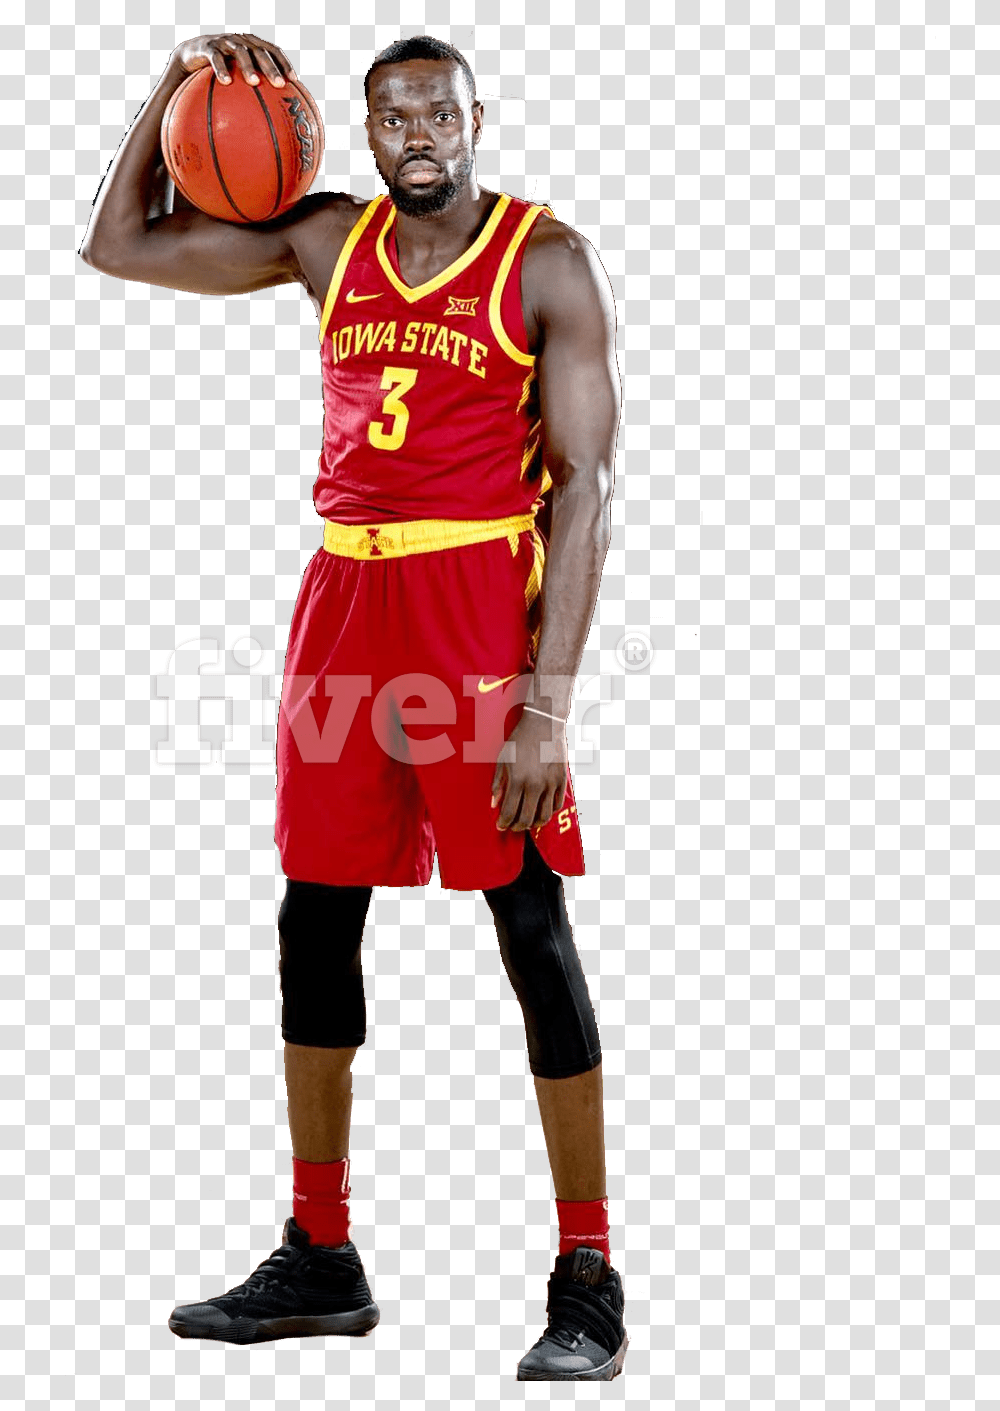 Download Basketball Player Image Background Nba Player, Person, Clothing, People, Shorts Transparent Png